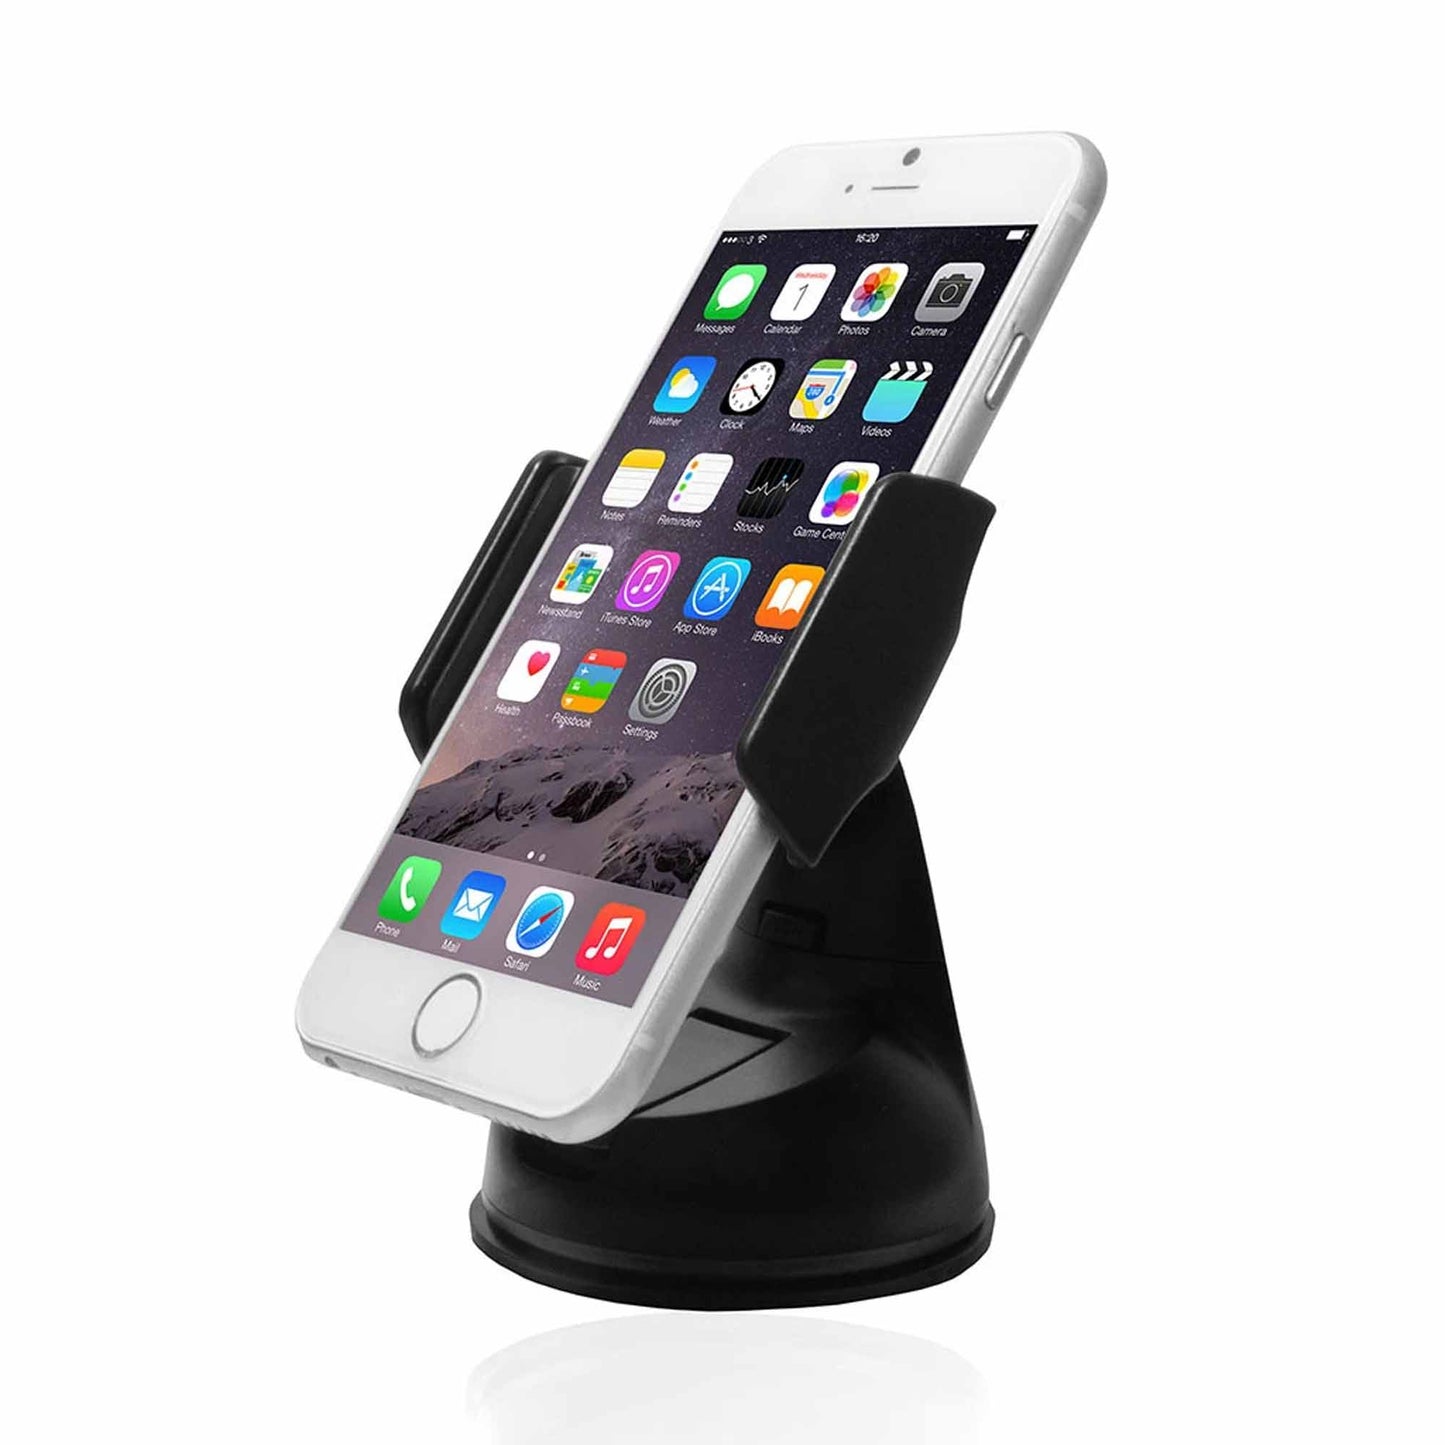 Monocozzi Automotive Compact Dashboard & Windshield Car Mount Mini with Spring Holder for Smartphone (Barcode: 4895199100930 )